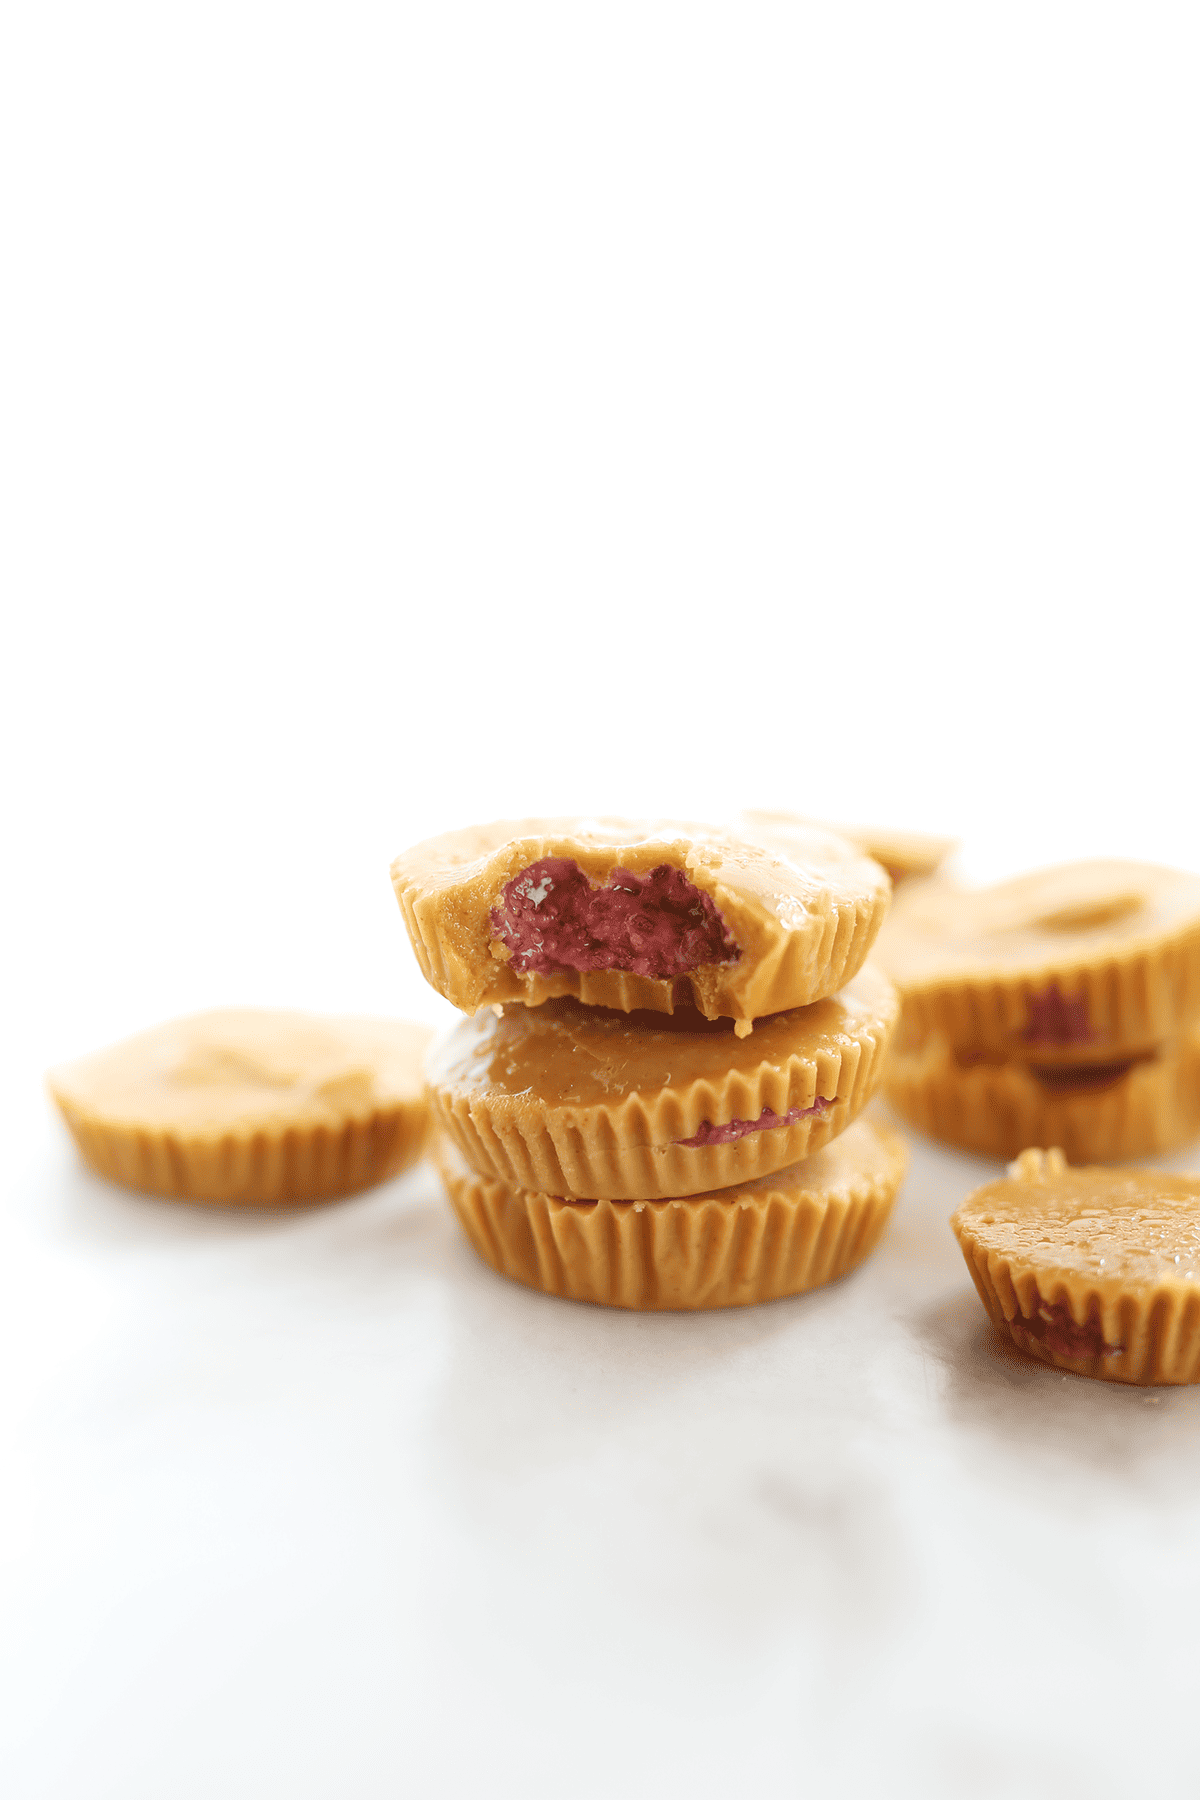 Peanut Butter and Jelly Cups are super sweet and indulgently rich and creamy! Reminiscent of a classic, the PB&J sandwich! Vegan and healthy-ish! 